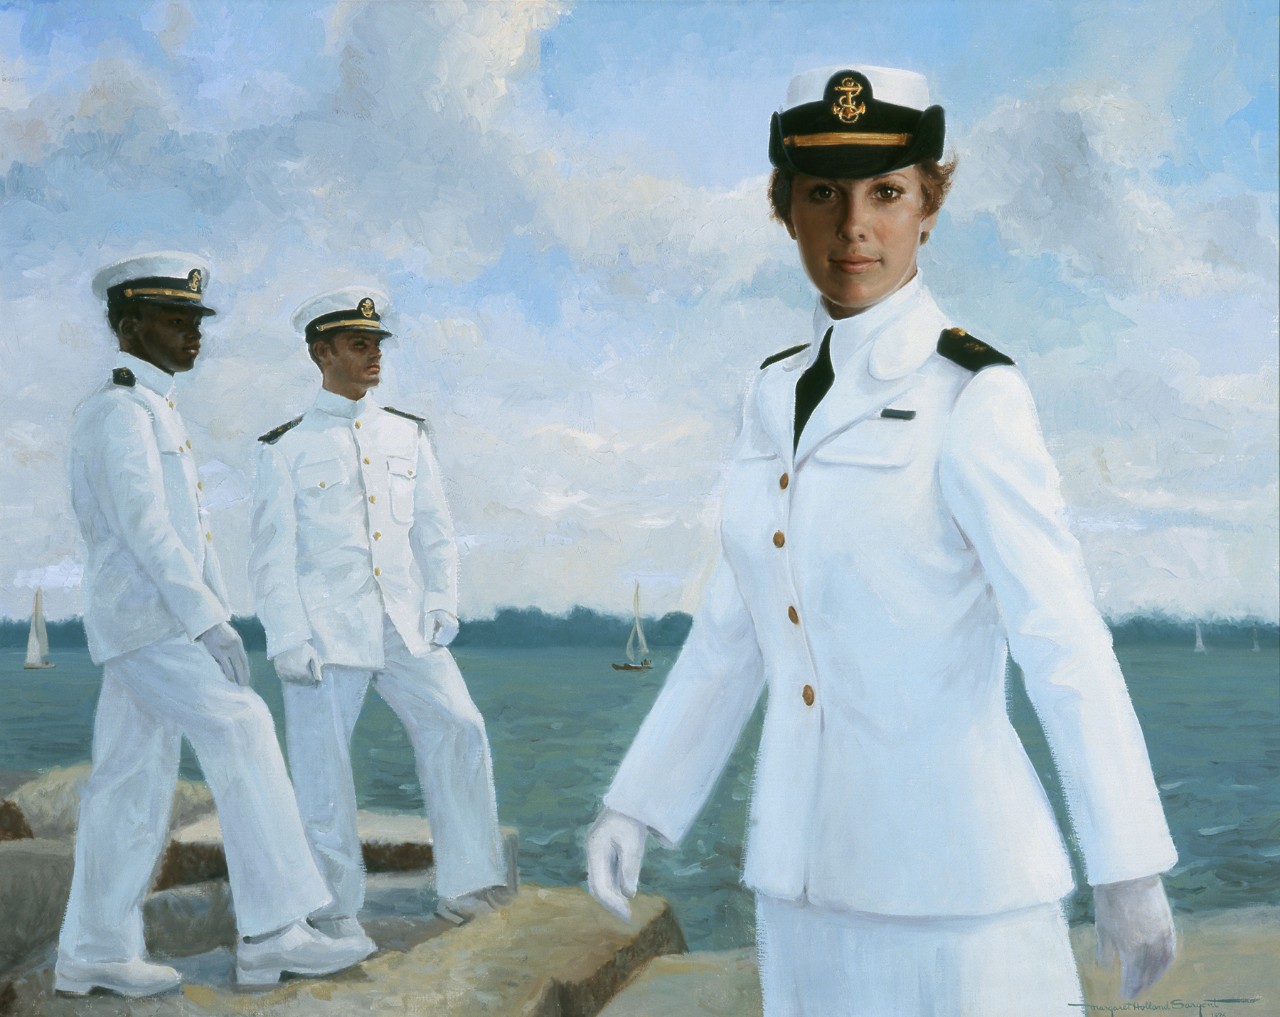 A female midshipman on the left side two male midshipmen standing on the seawall the closer one is African American